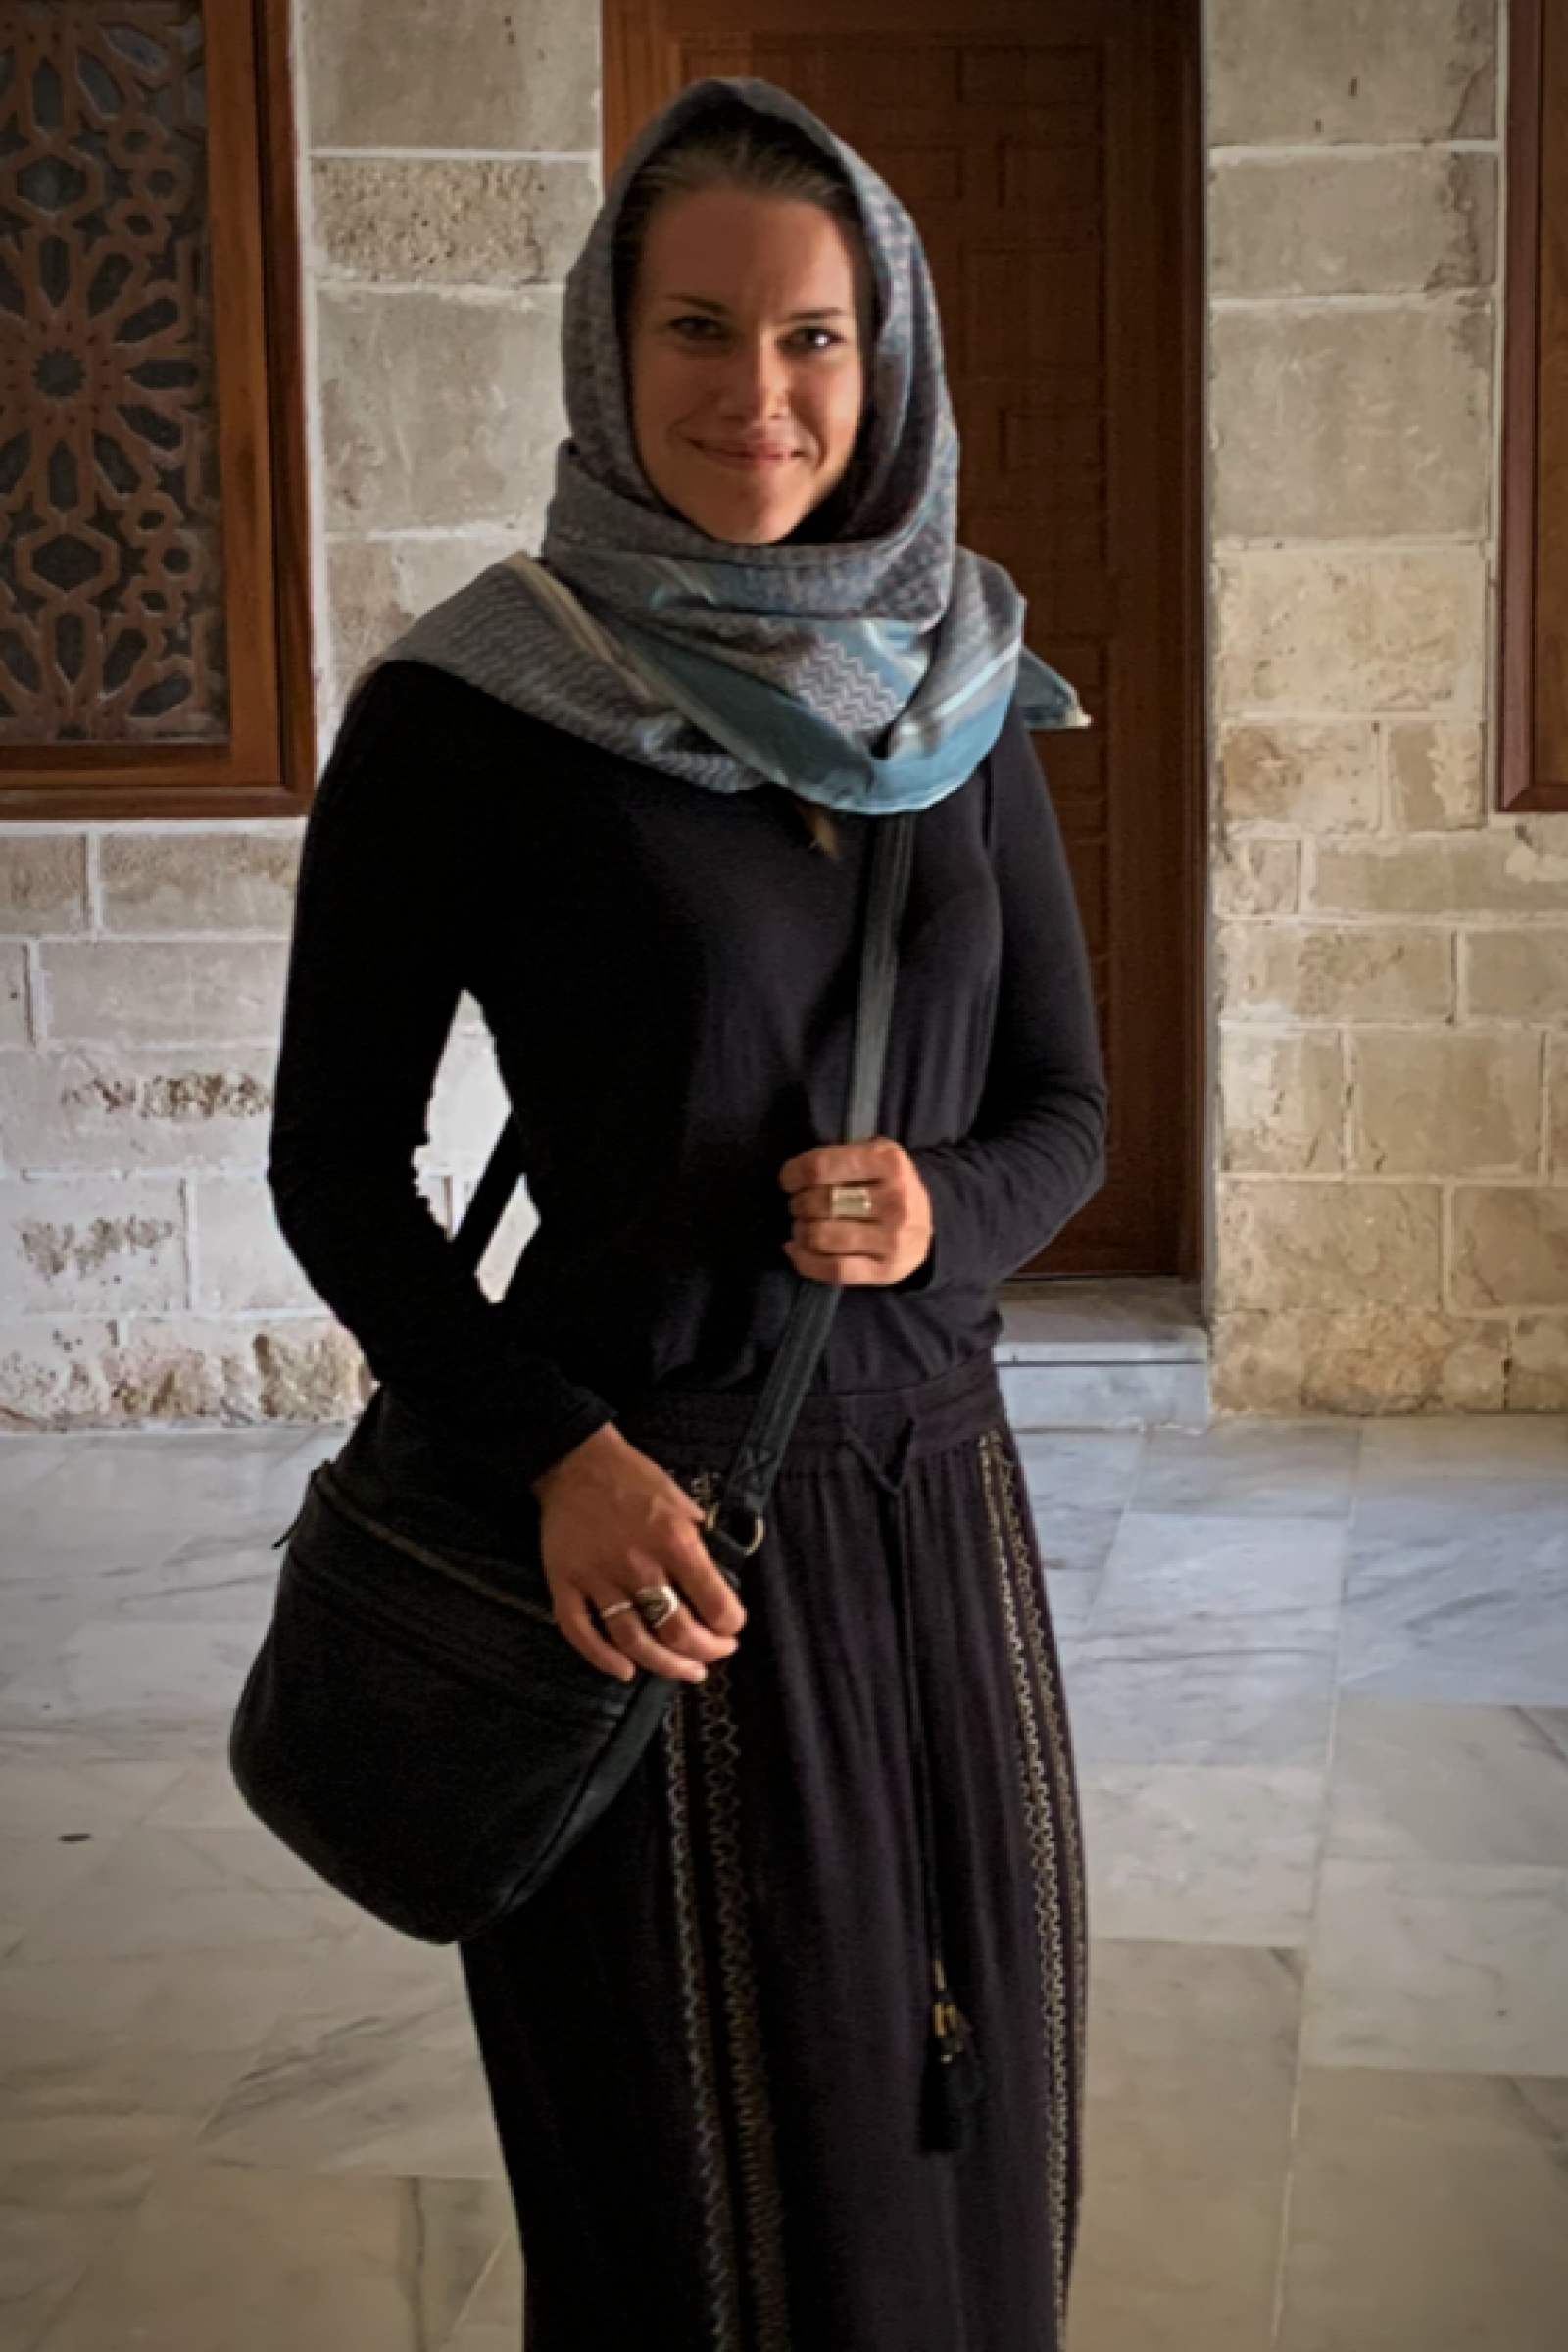 Erin Kilborn, visiting the grand old Mosque of the old city of Gaza during her assignment